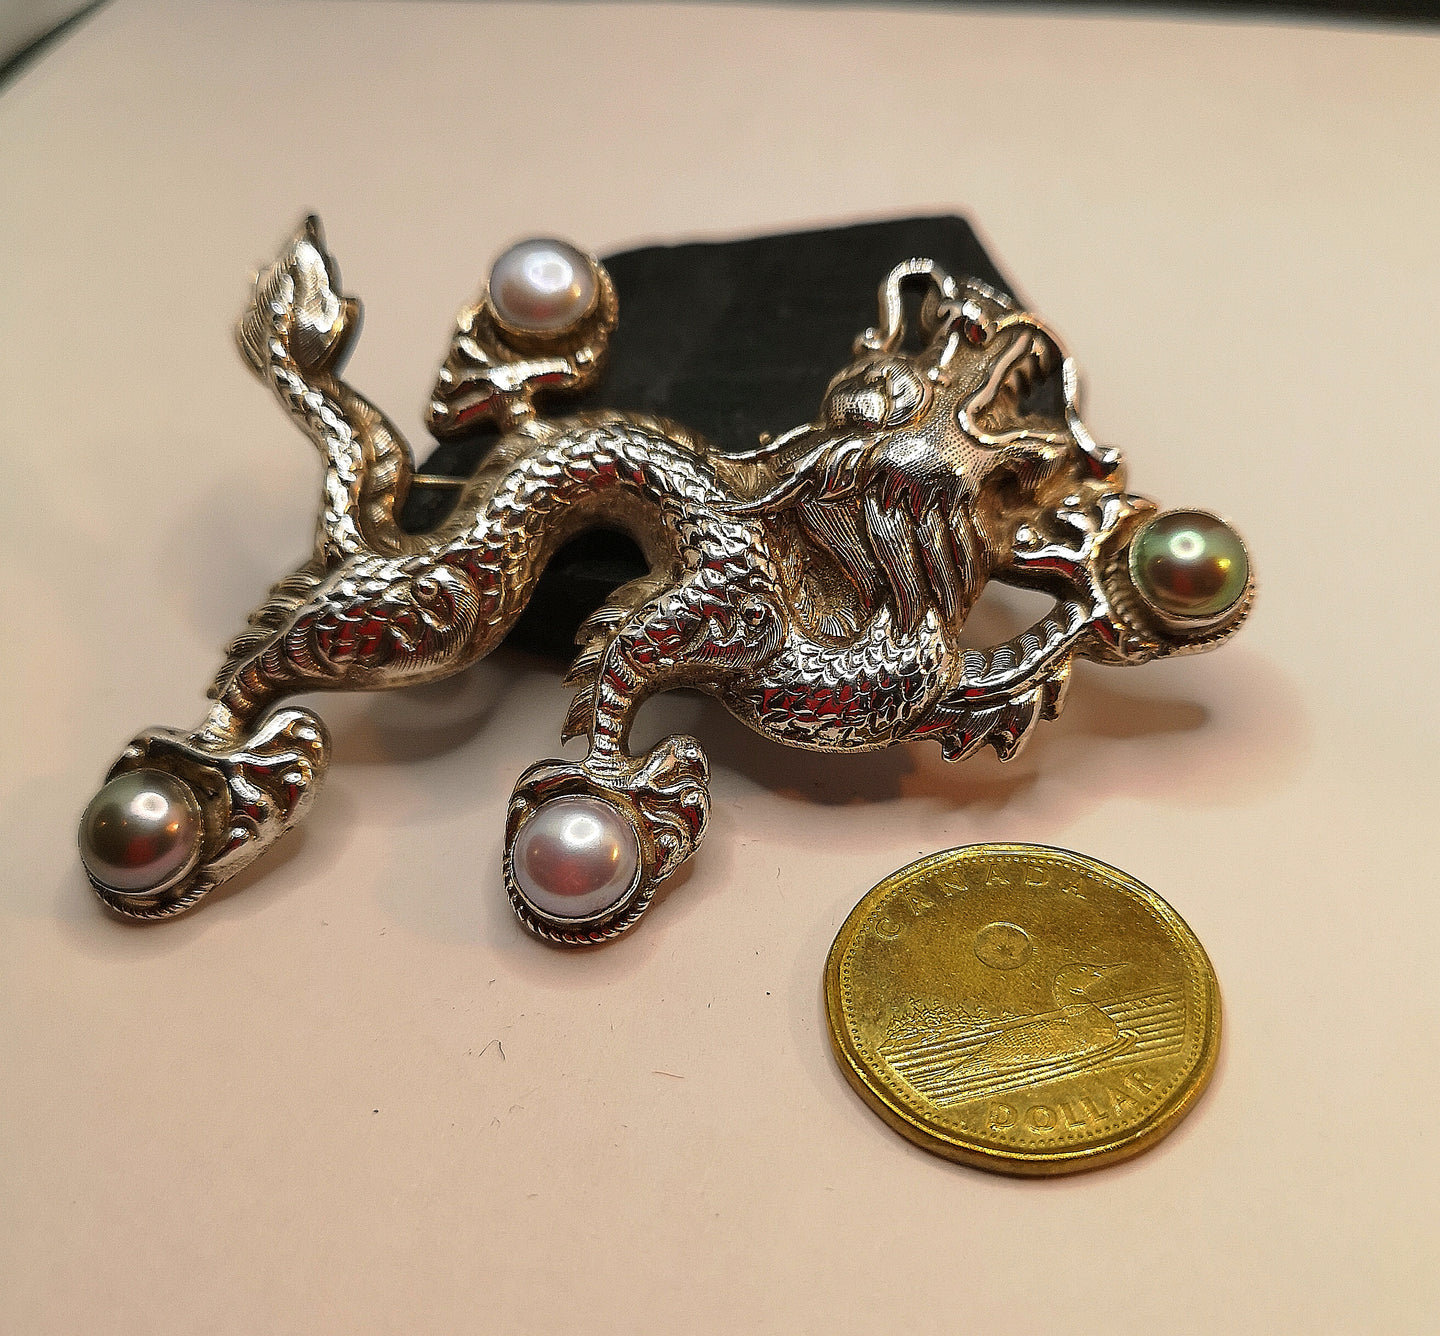 Dragon brooch in sterling silver with genuine mabe pearl, handmade